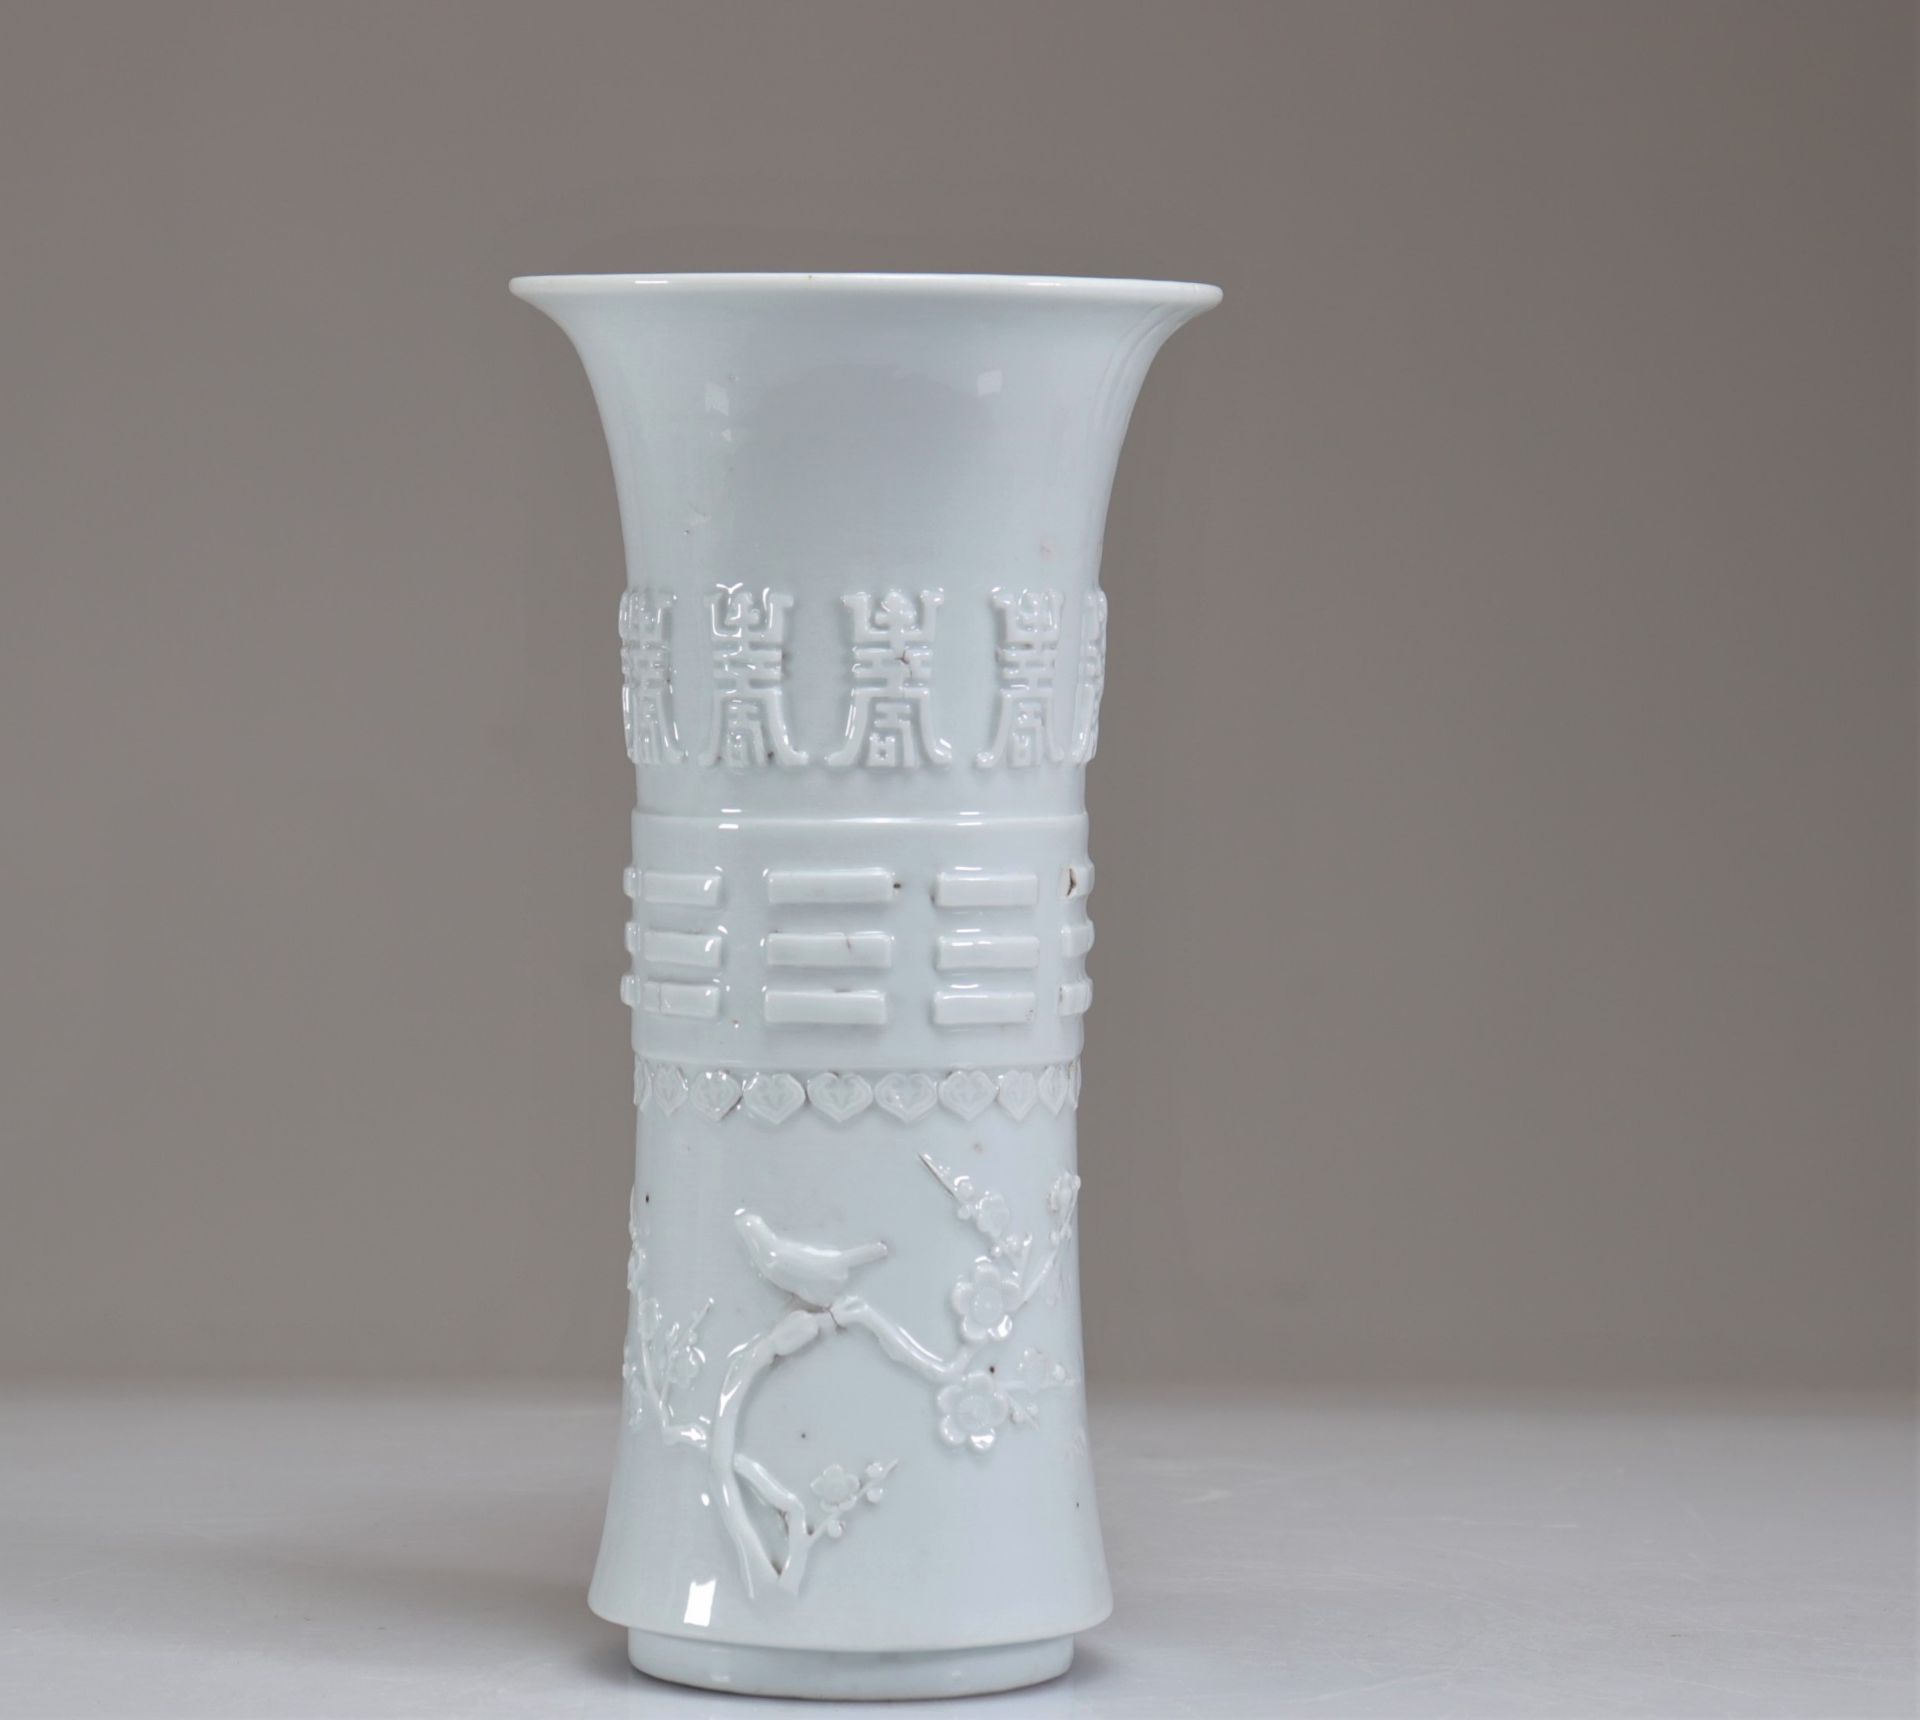 Rare white Gu-shaped vase decorated with characters, Qing period, 18th century